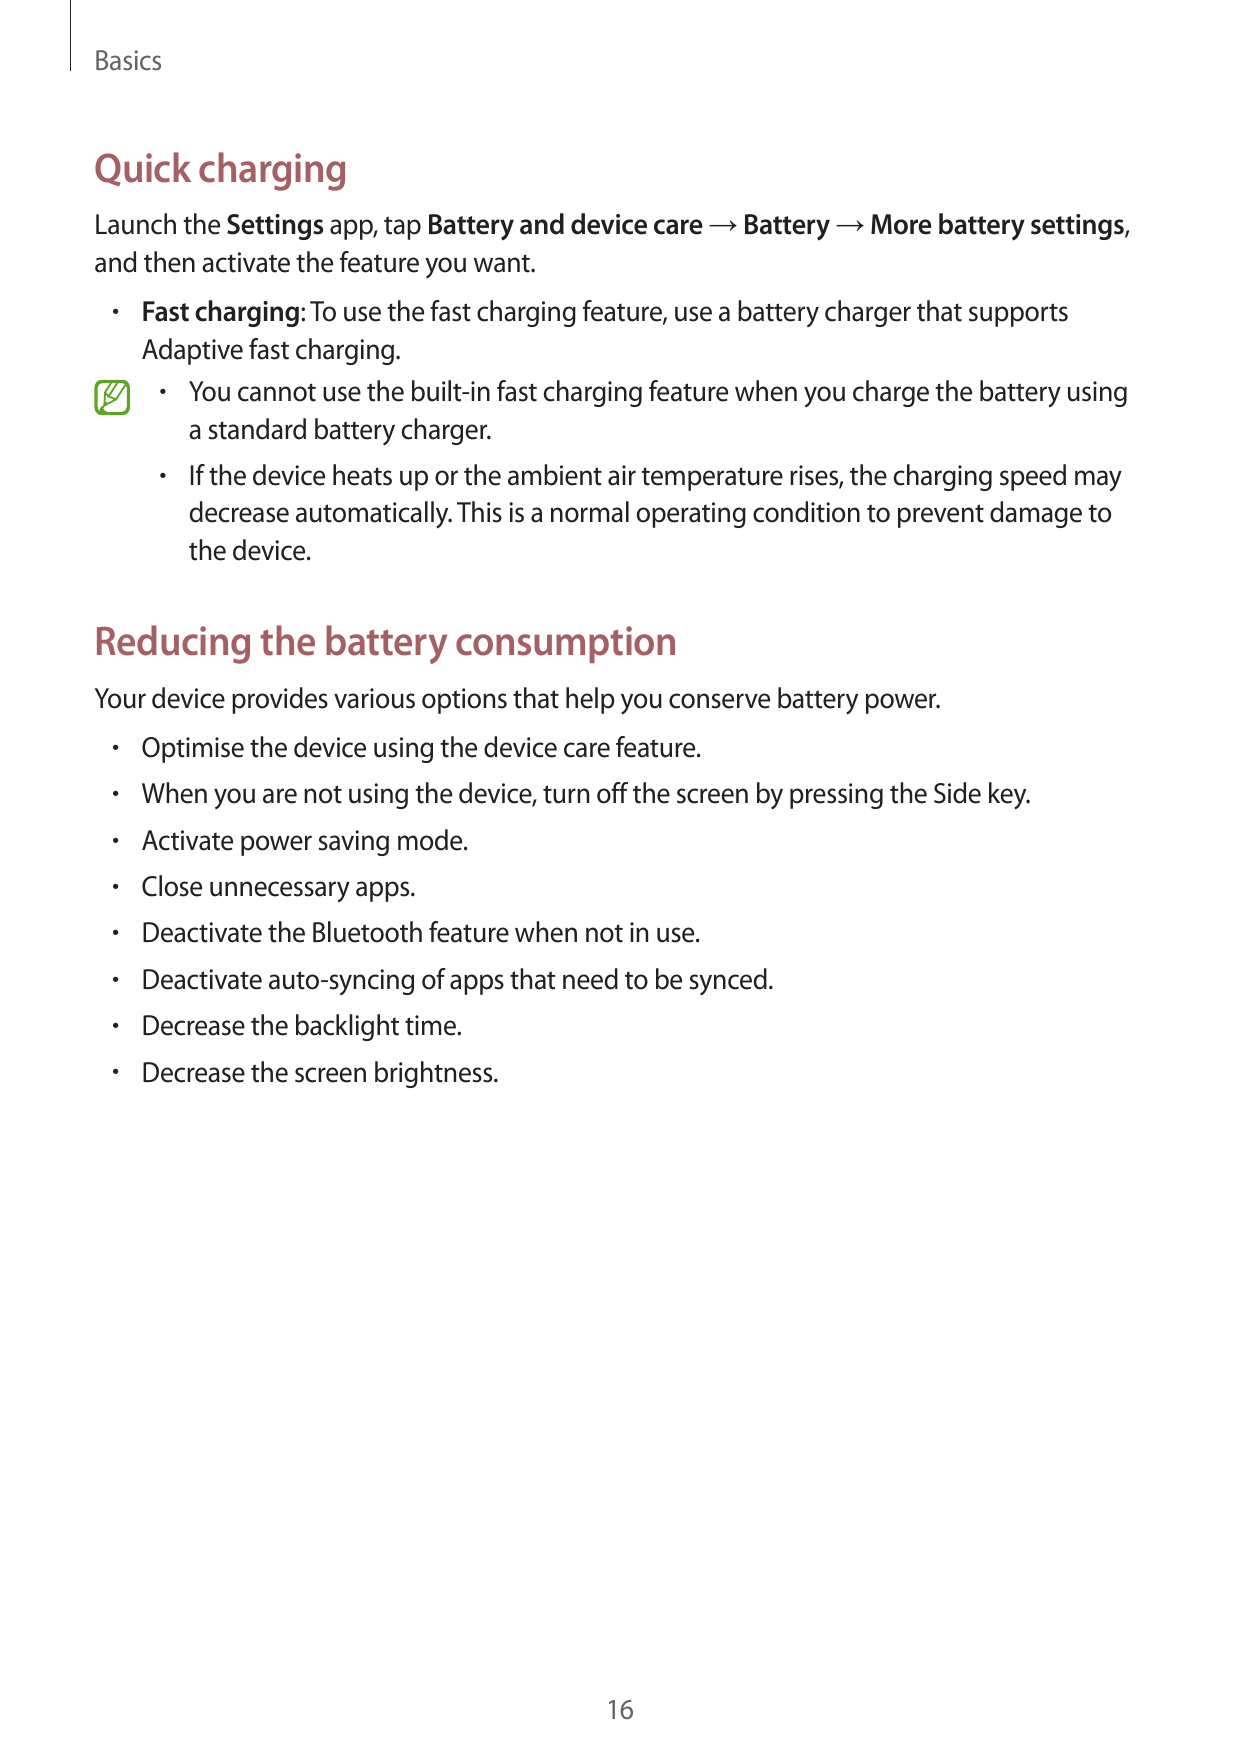 BasicsQuick chargingLaunch the Settings app, tap Battery and device care → Battery → More battery settings,and then activate the